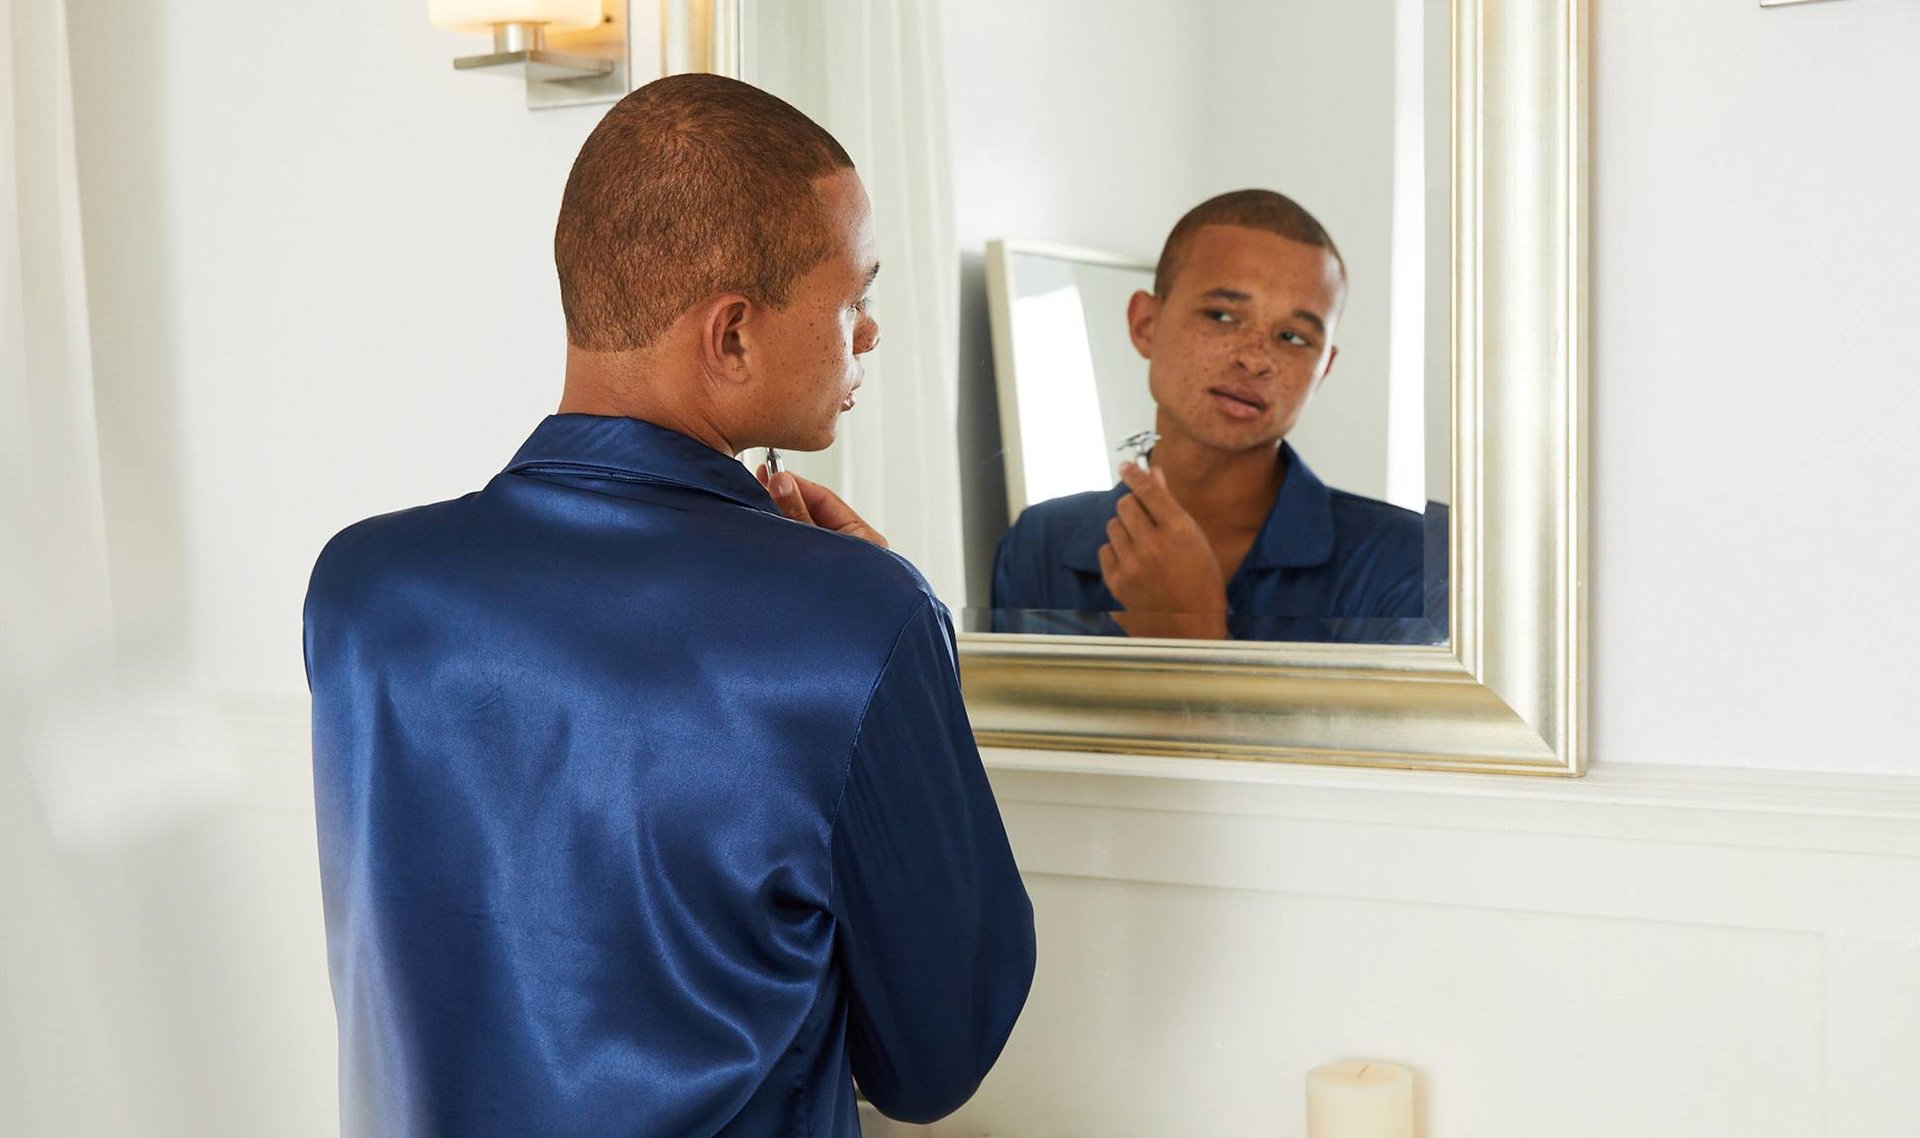 5 Post-Shave Products for Men That Help With Skin Irritation